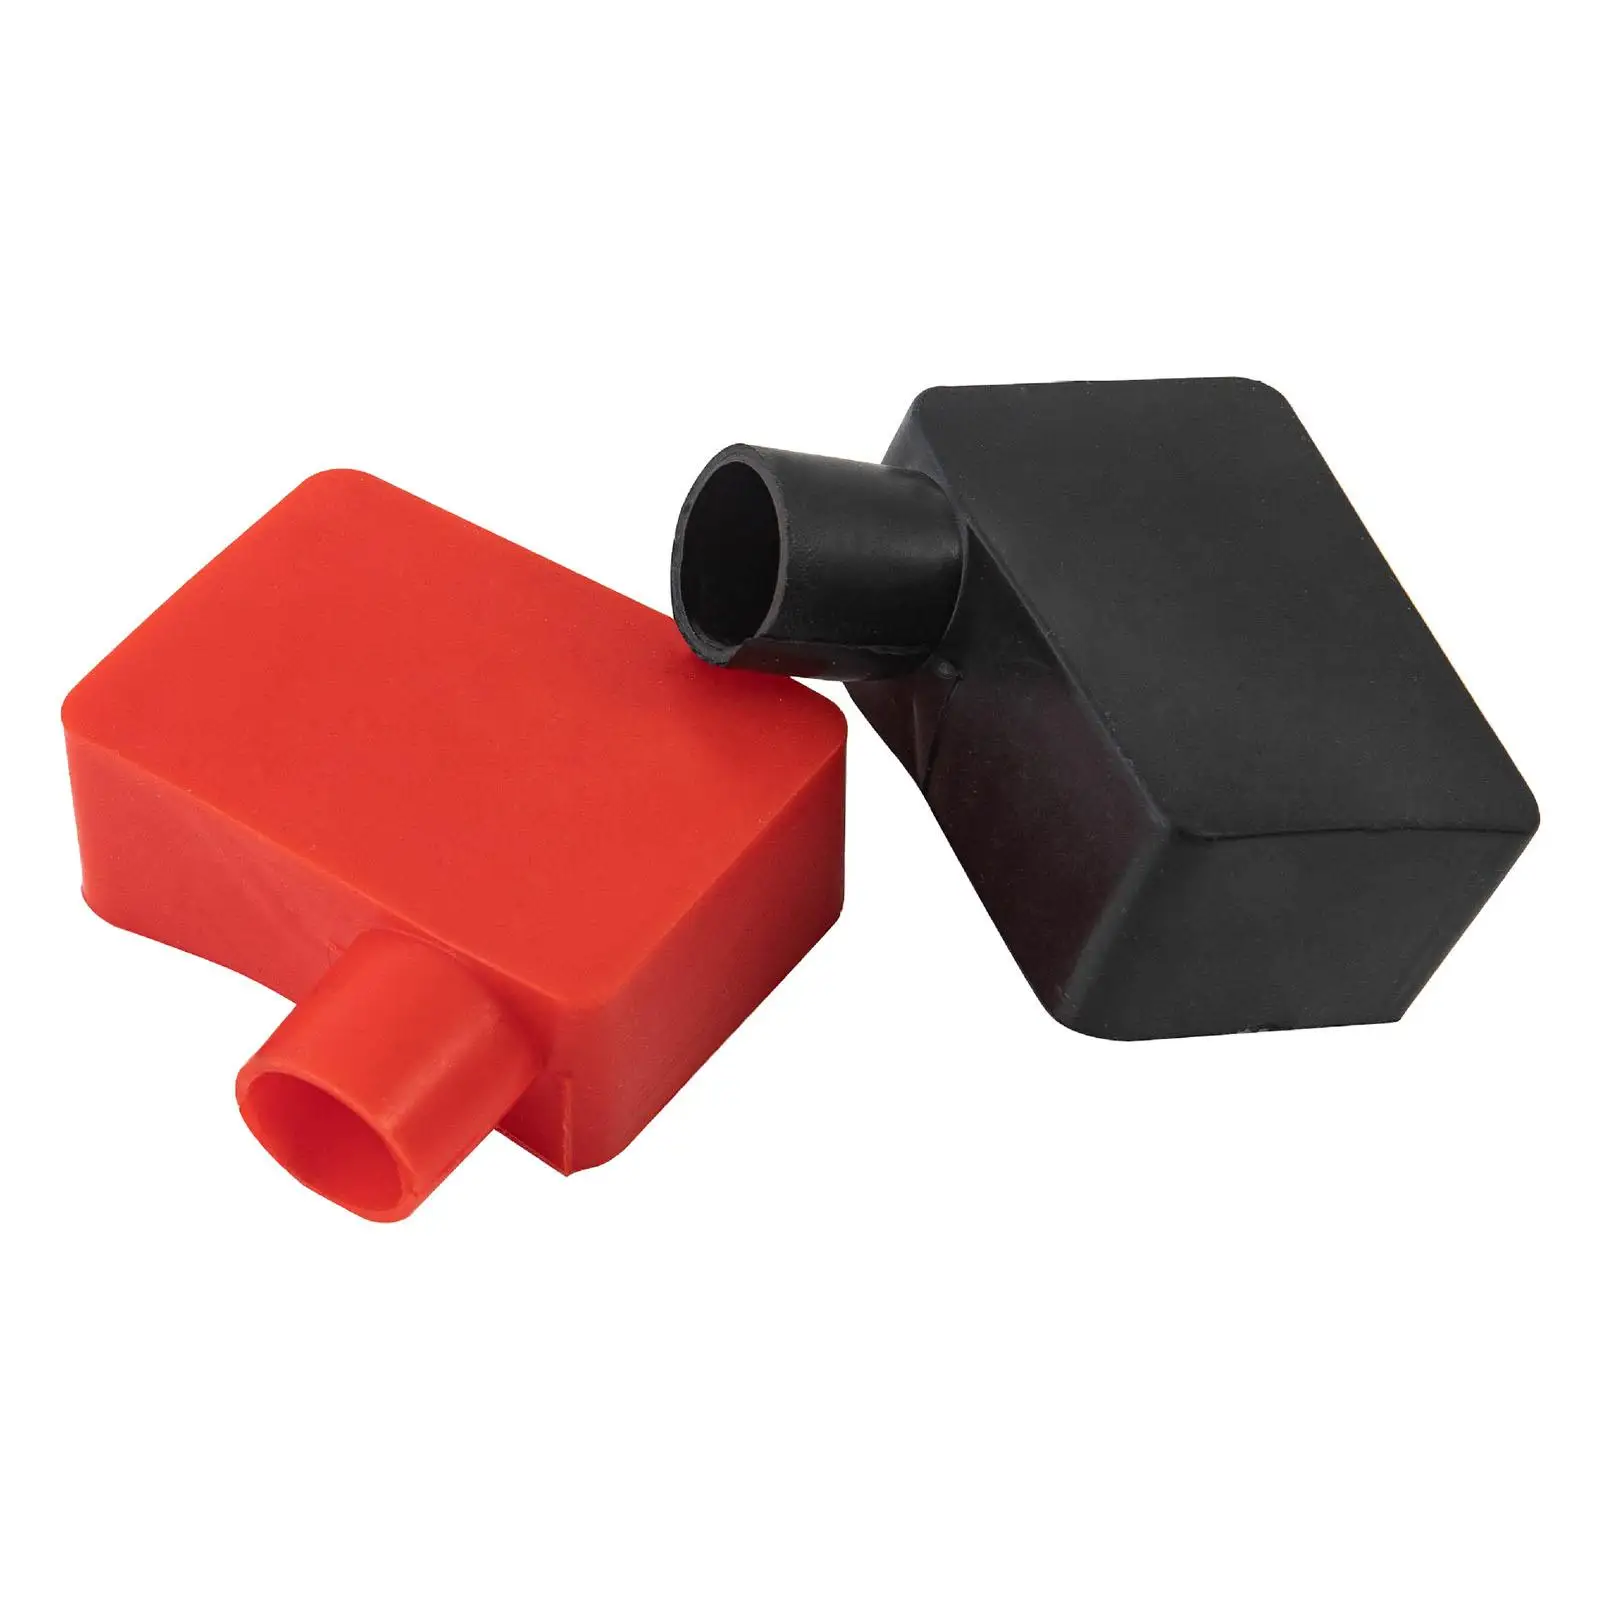 uxcell Battery Terminal Insulating Rubber Protector Covers for 14mm Terminal 8mm Cable Red Black 5 Pairs 